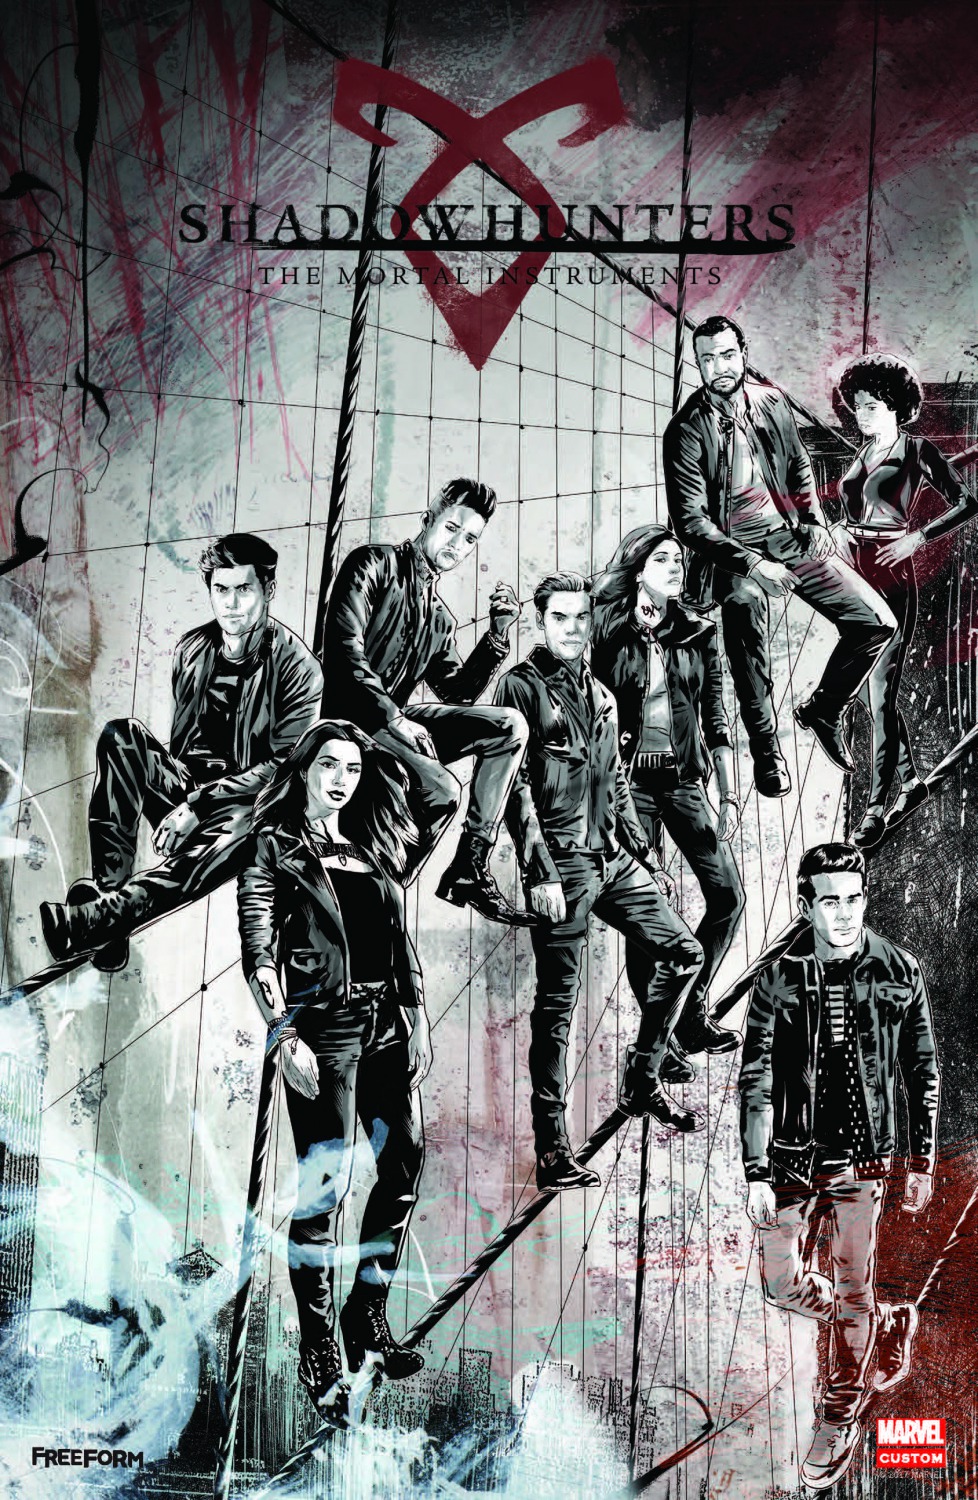 Extra Large TV Poster Image for Shadowhunters: The Mortal Instruments (#17 of 19)